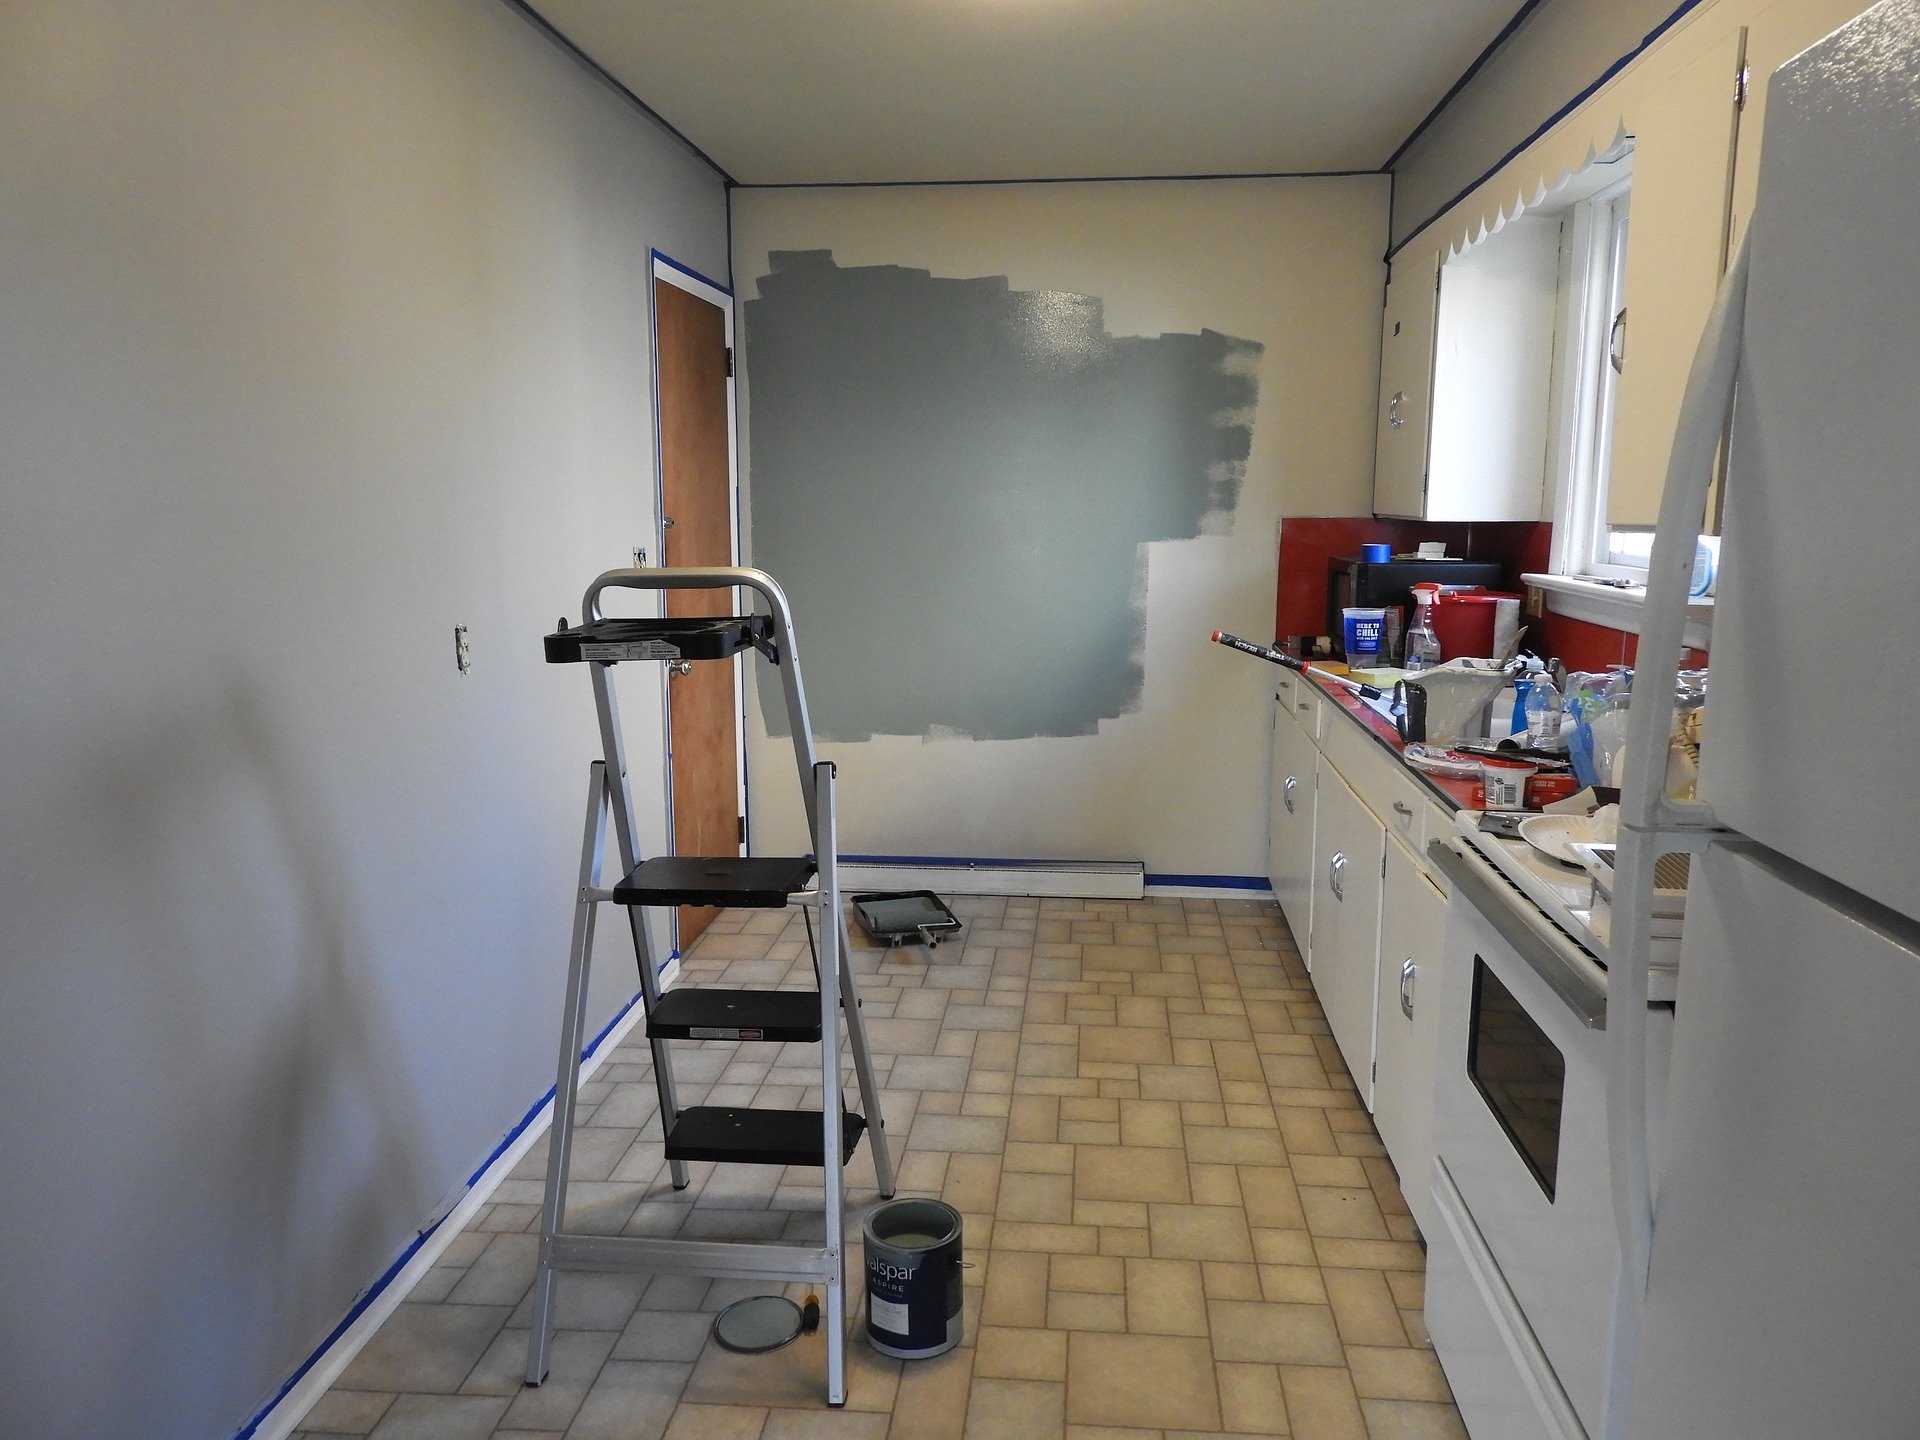 Getting a DIY renovation done on time and on budget